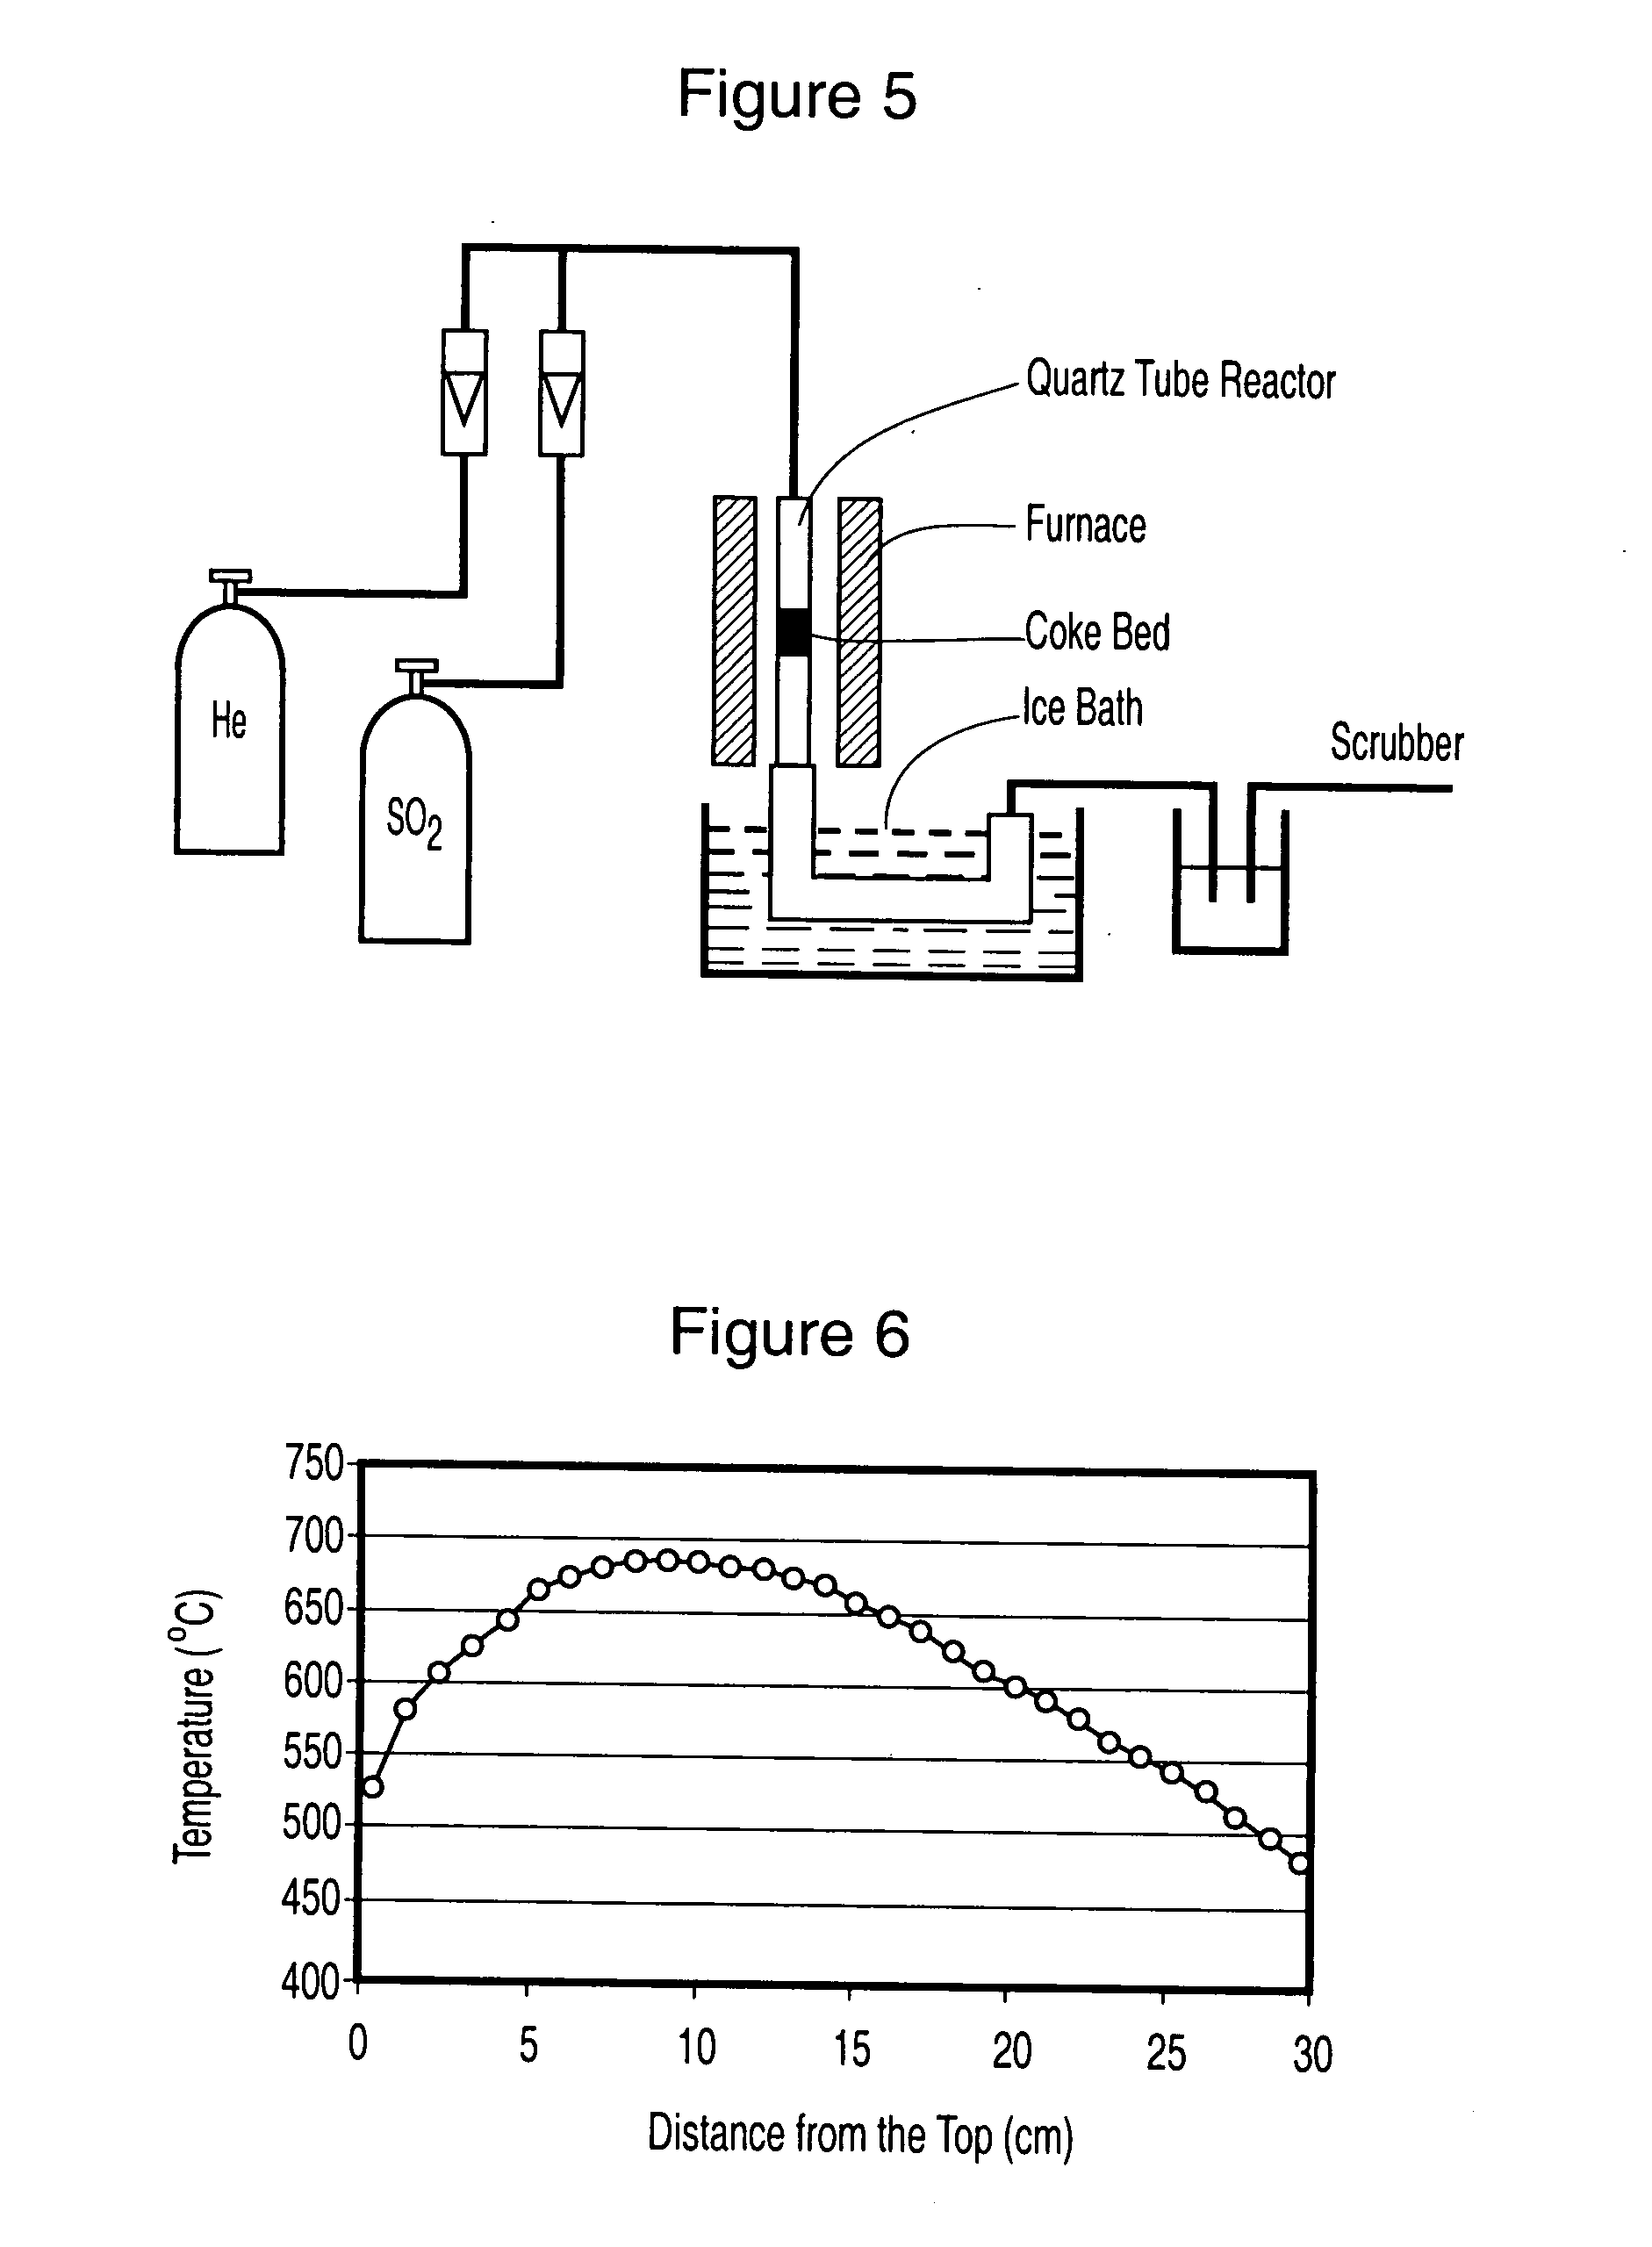 Production of sulphur and activated carbon